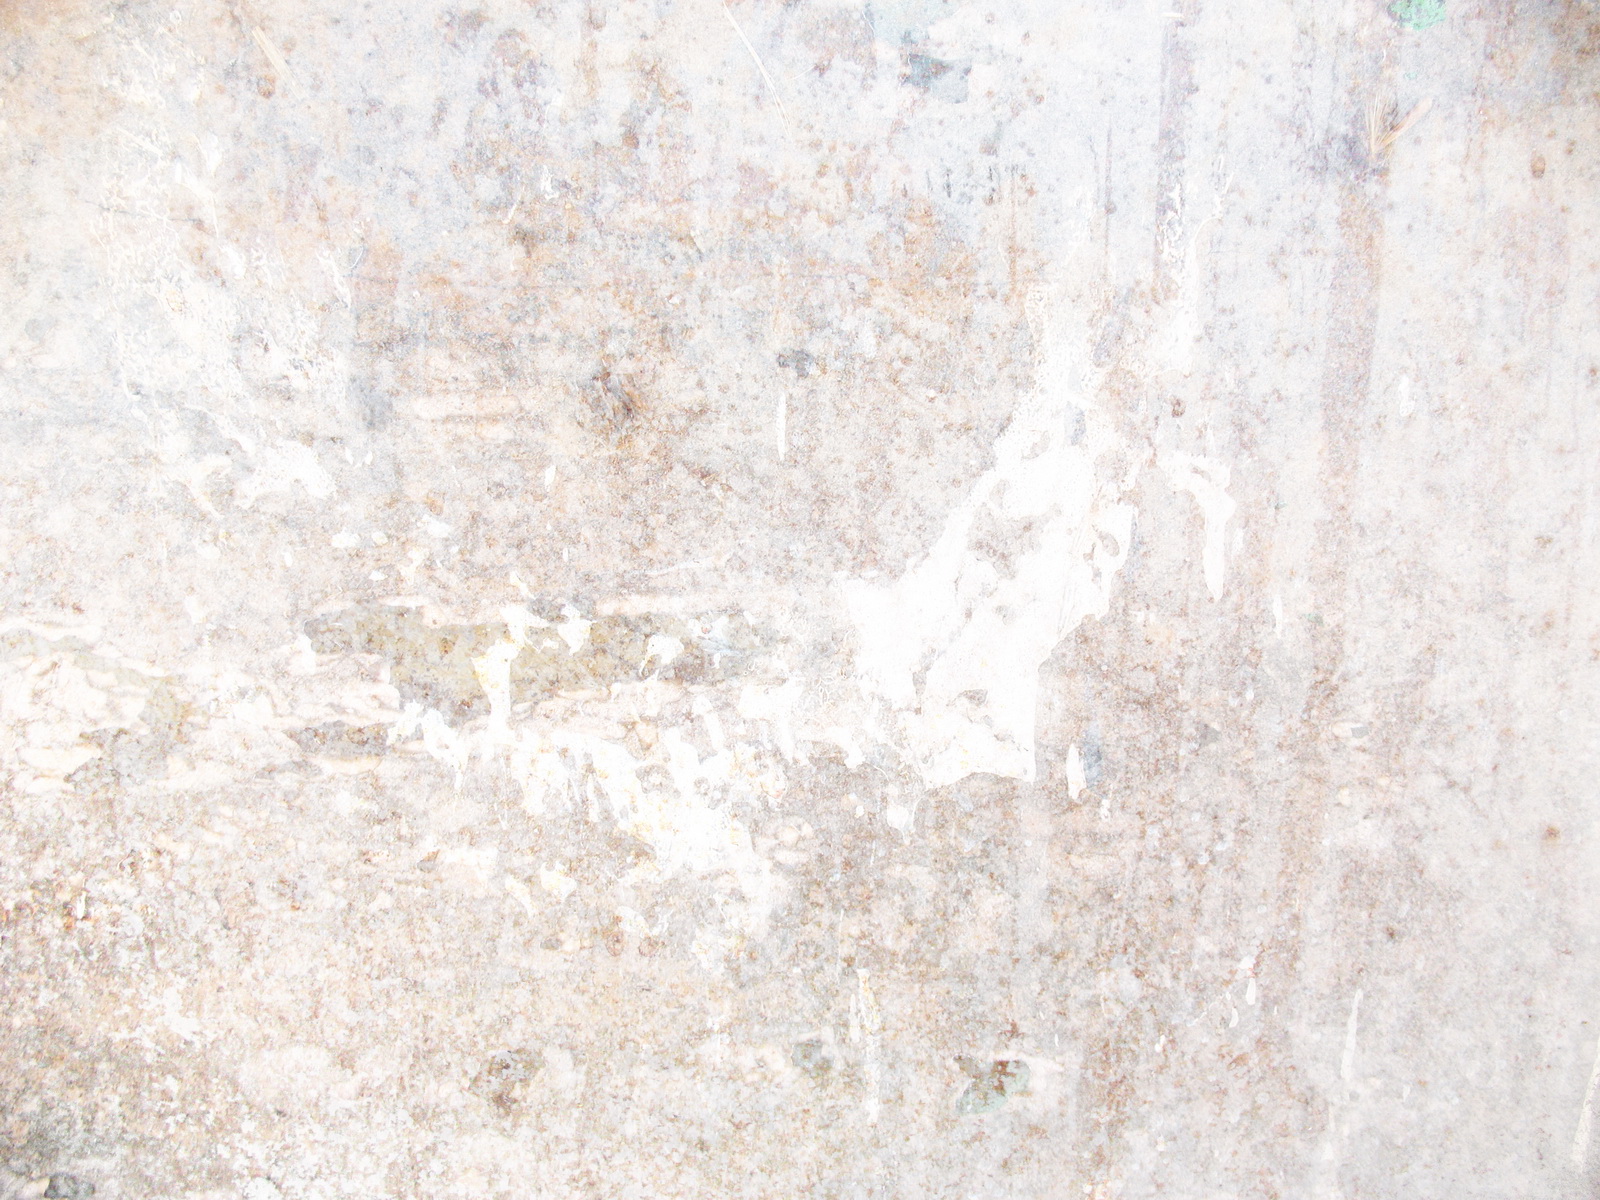  texture download photo background white stucco background texture